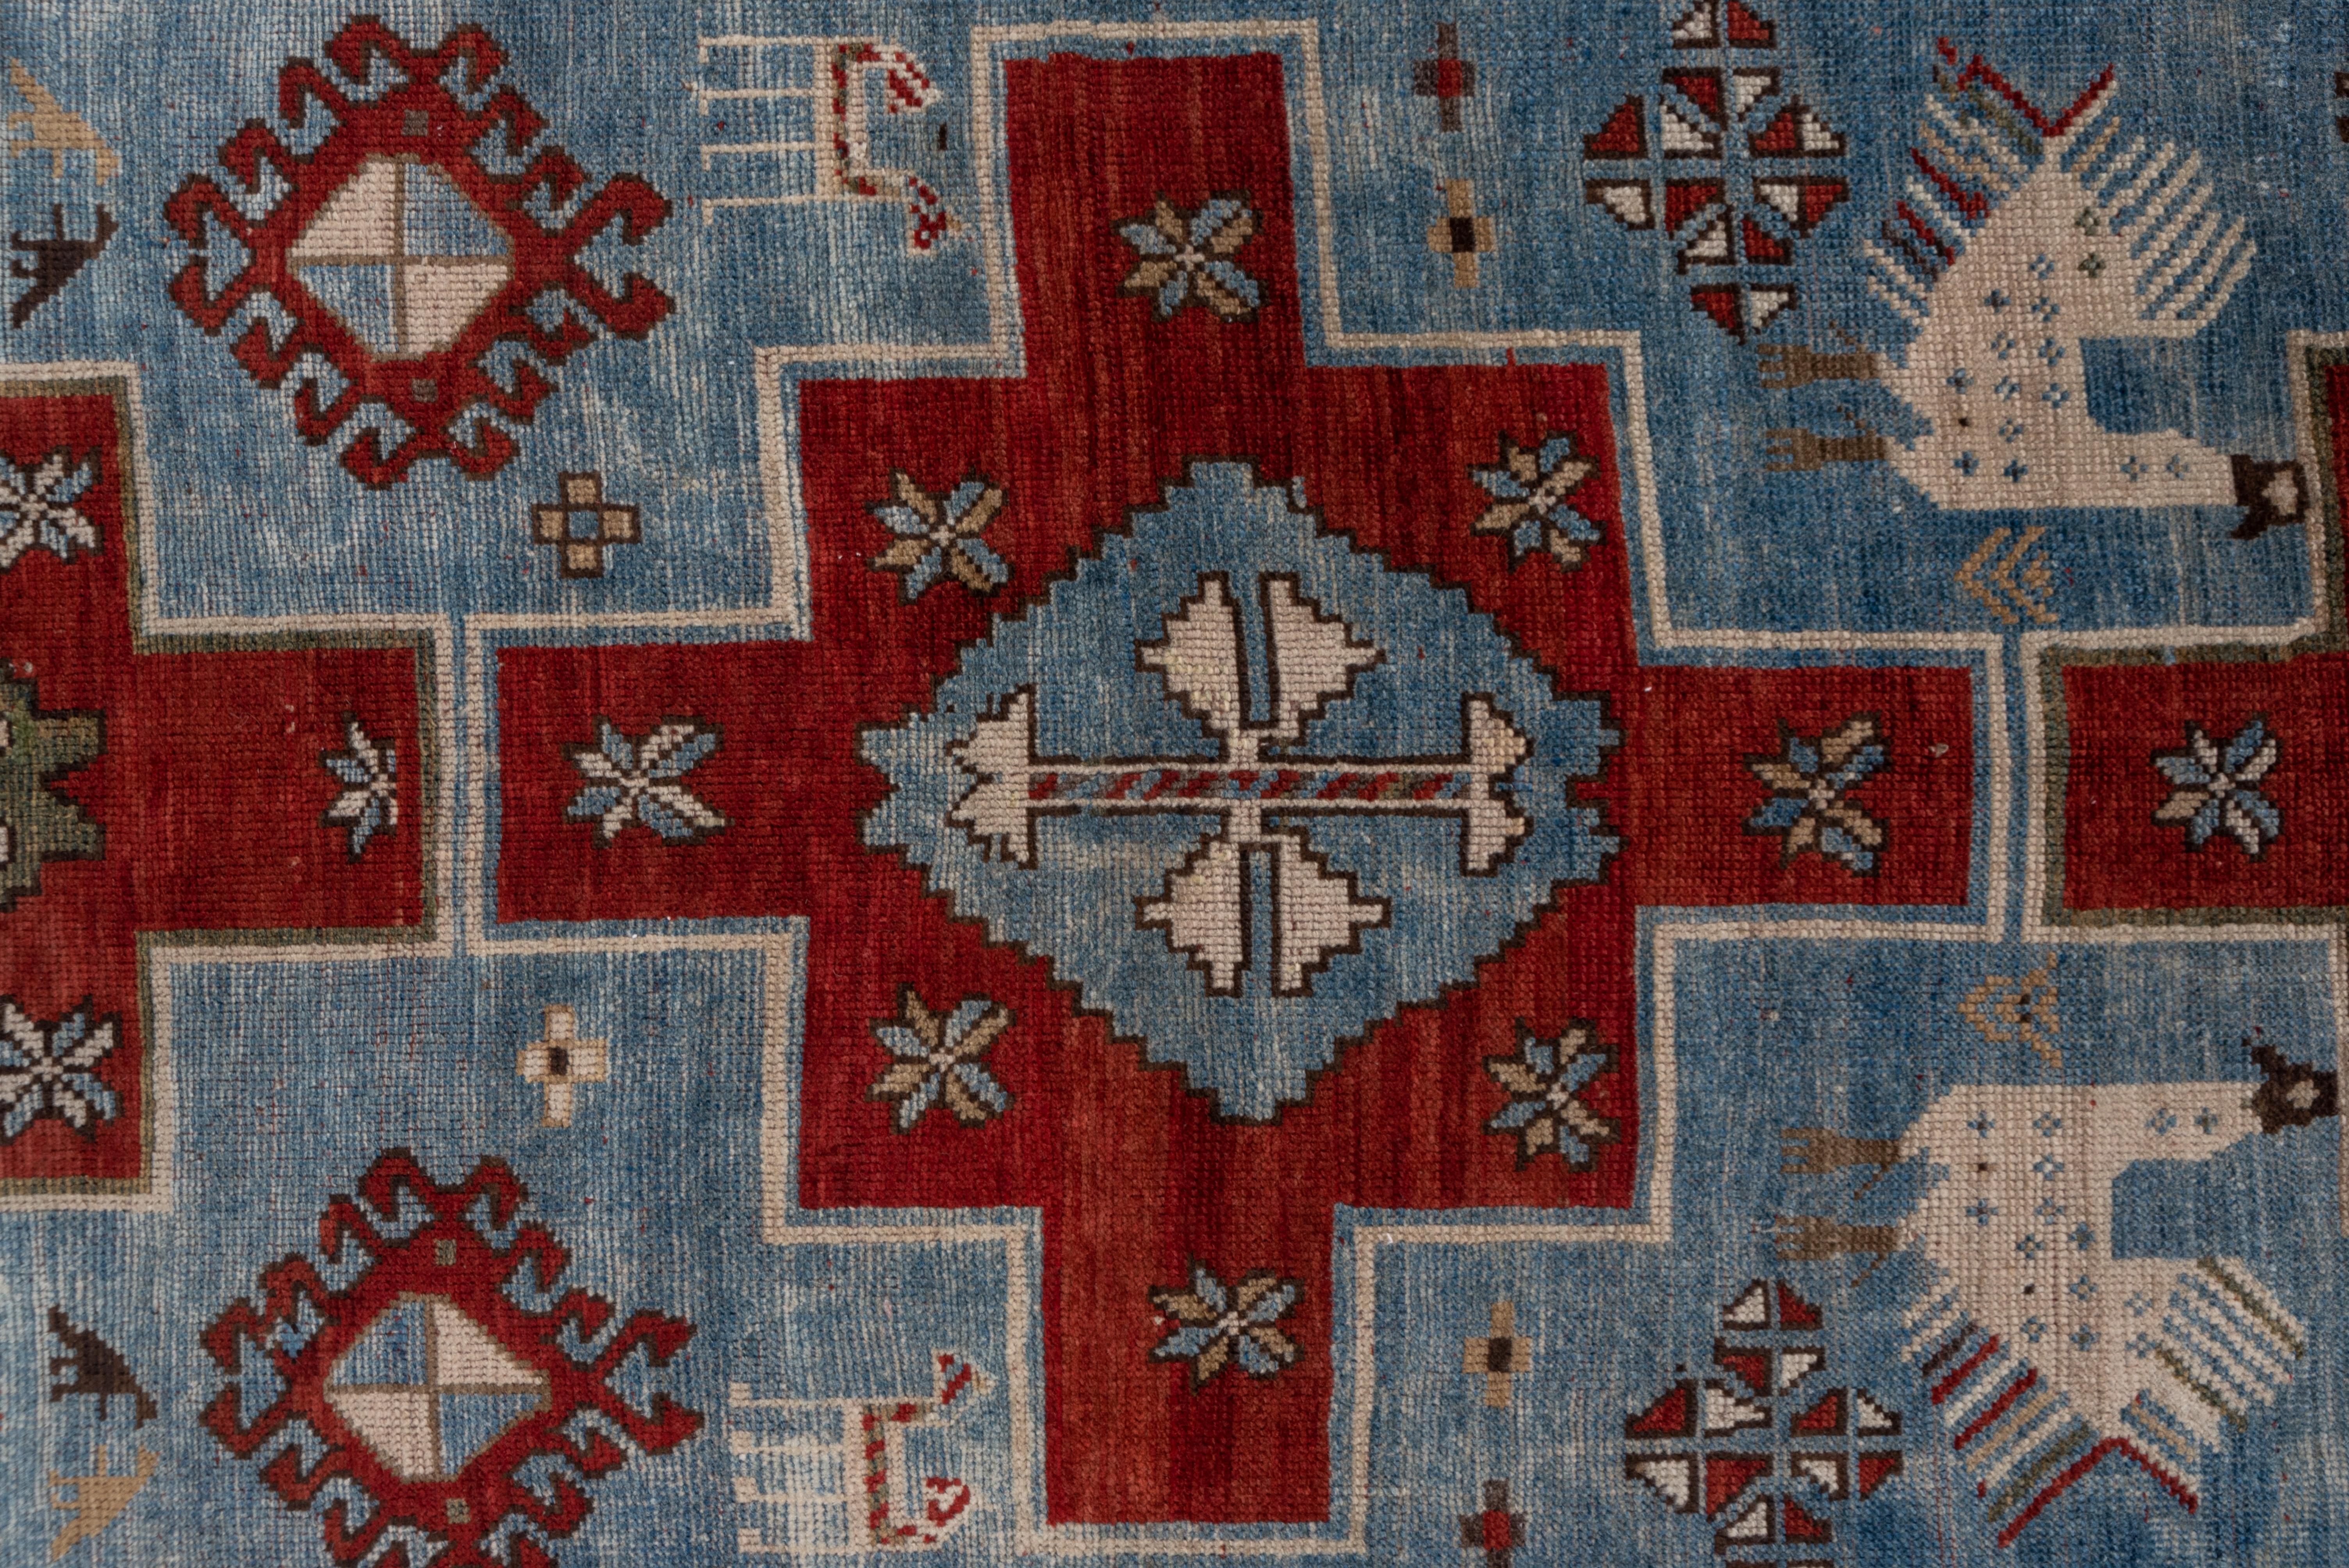 Wool Antique Tribal Caucasian Rug, Blue and Red Field, Green Accents, Kazak Style